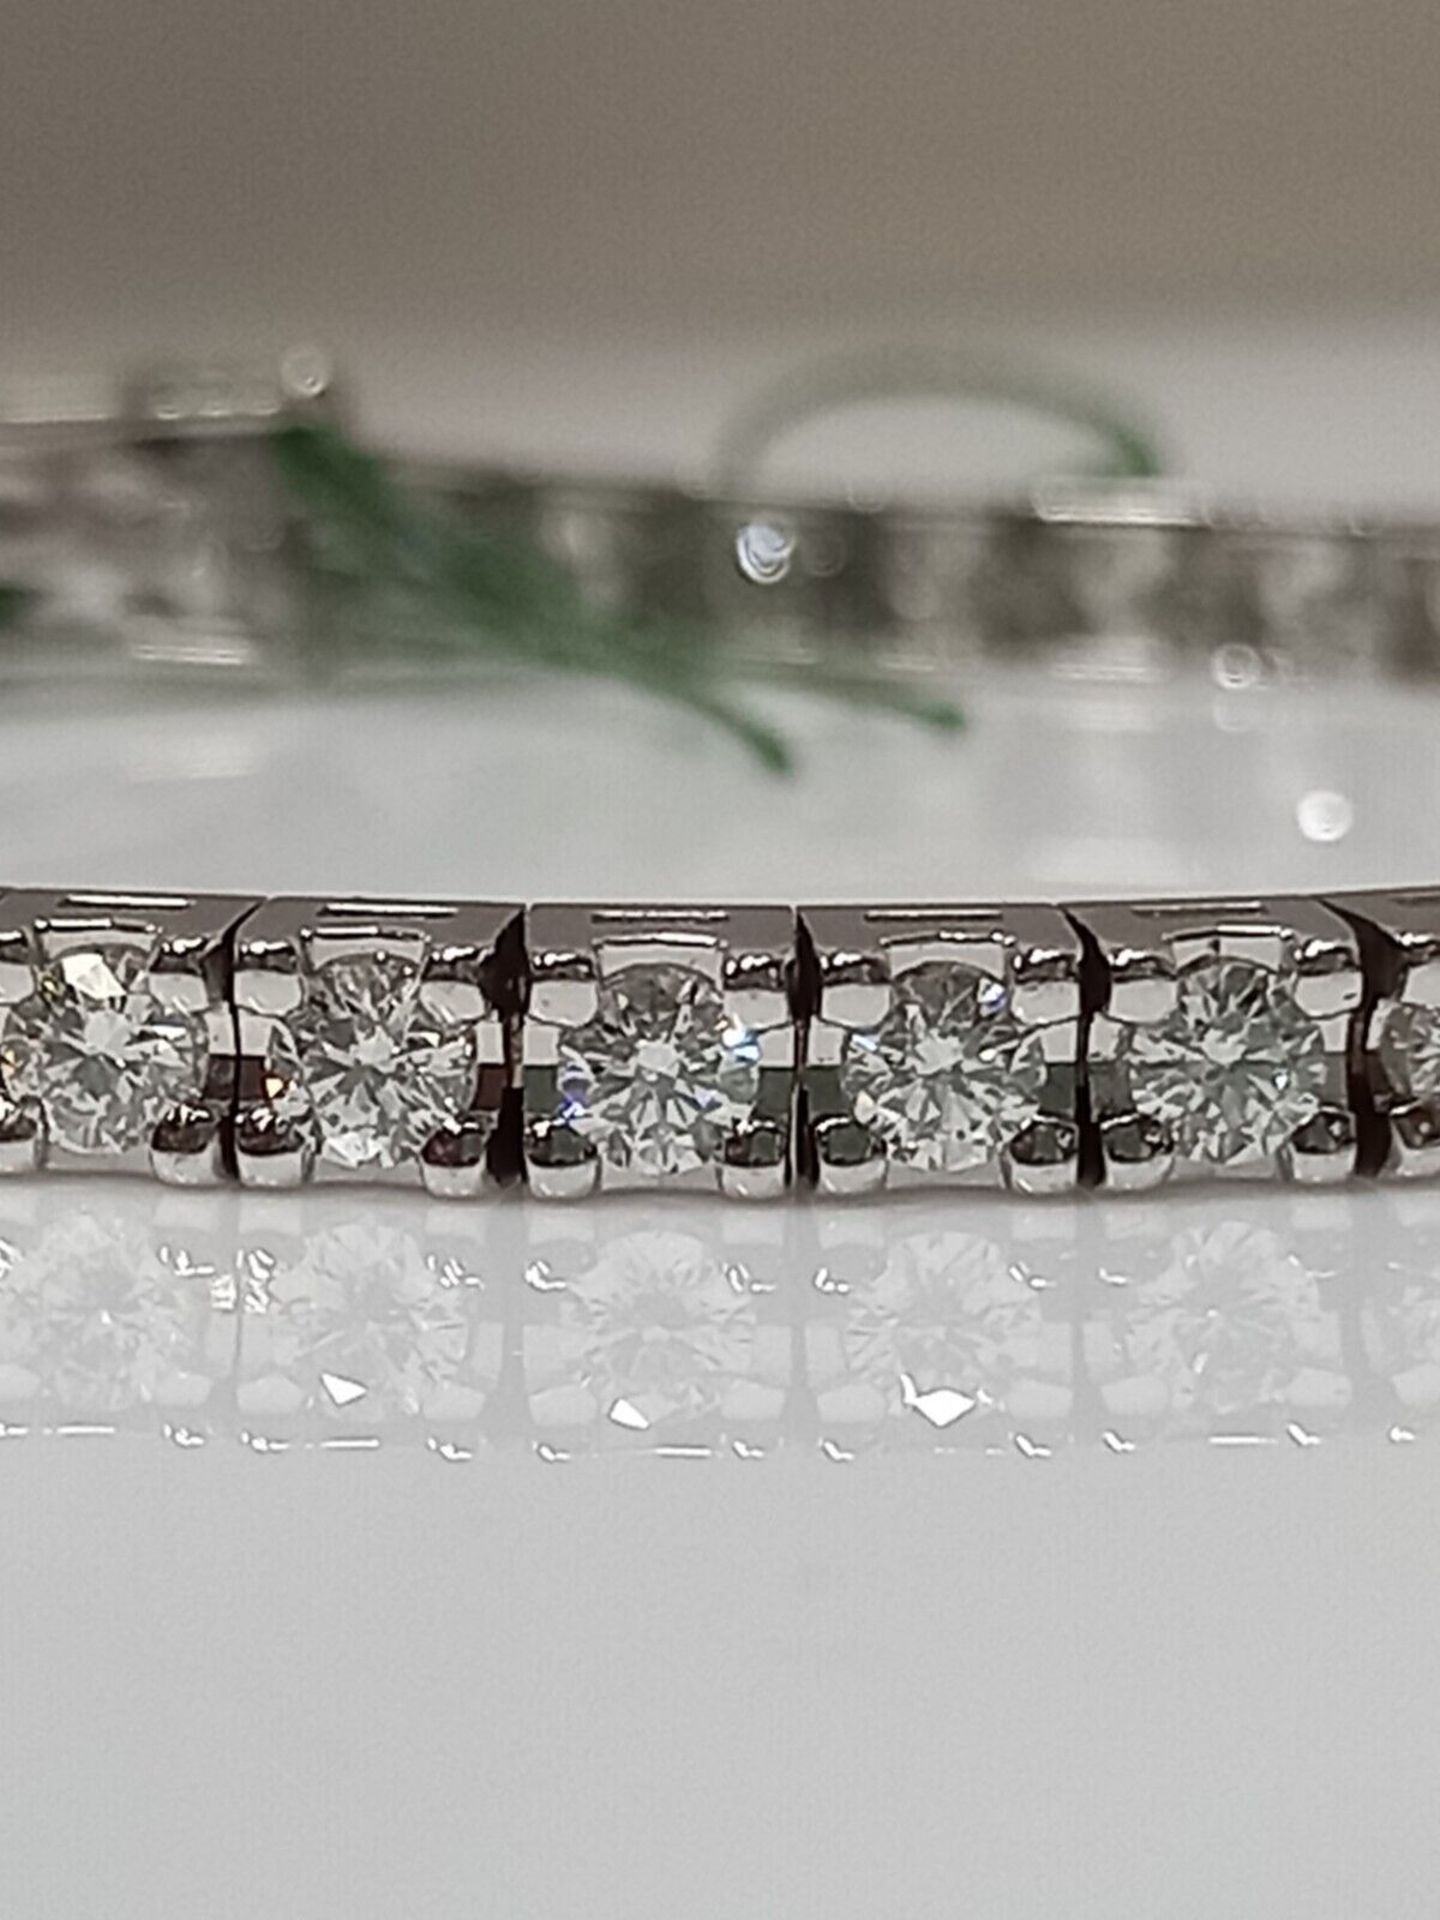 4CT DIAMOND TENNIS BRACELET 18CT WHITE GOLD IN GIFT BOX WITH VALUATION CERTIFICATE OF £9995 - Image 4 of 5